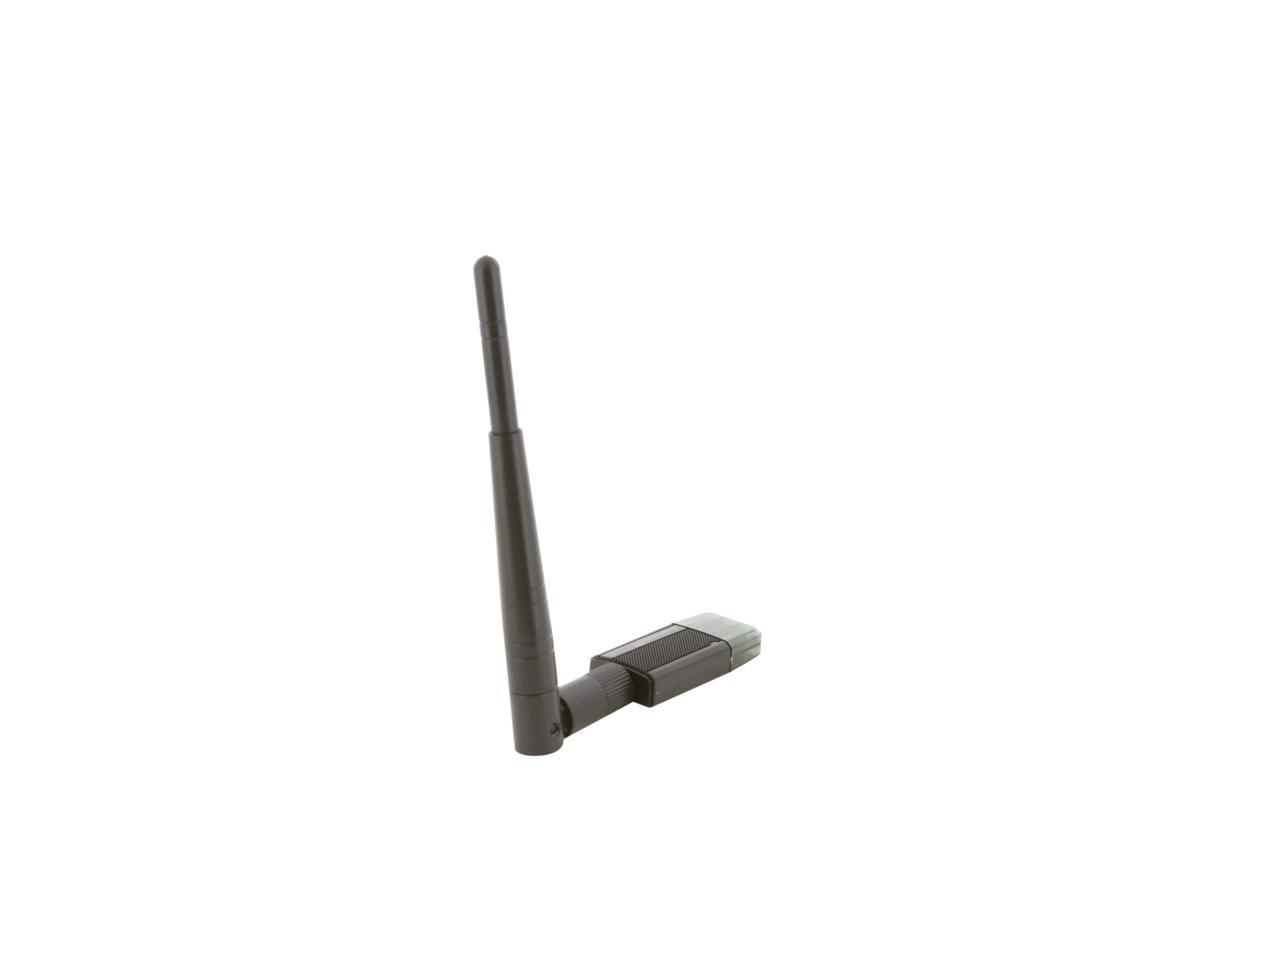 amped wireless adapter for pc